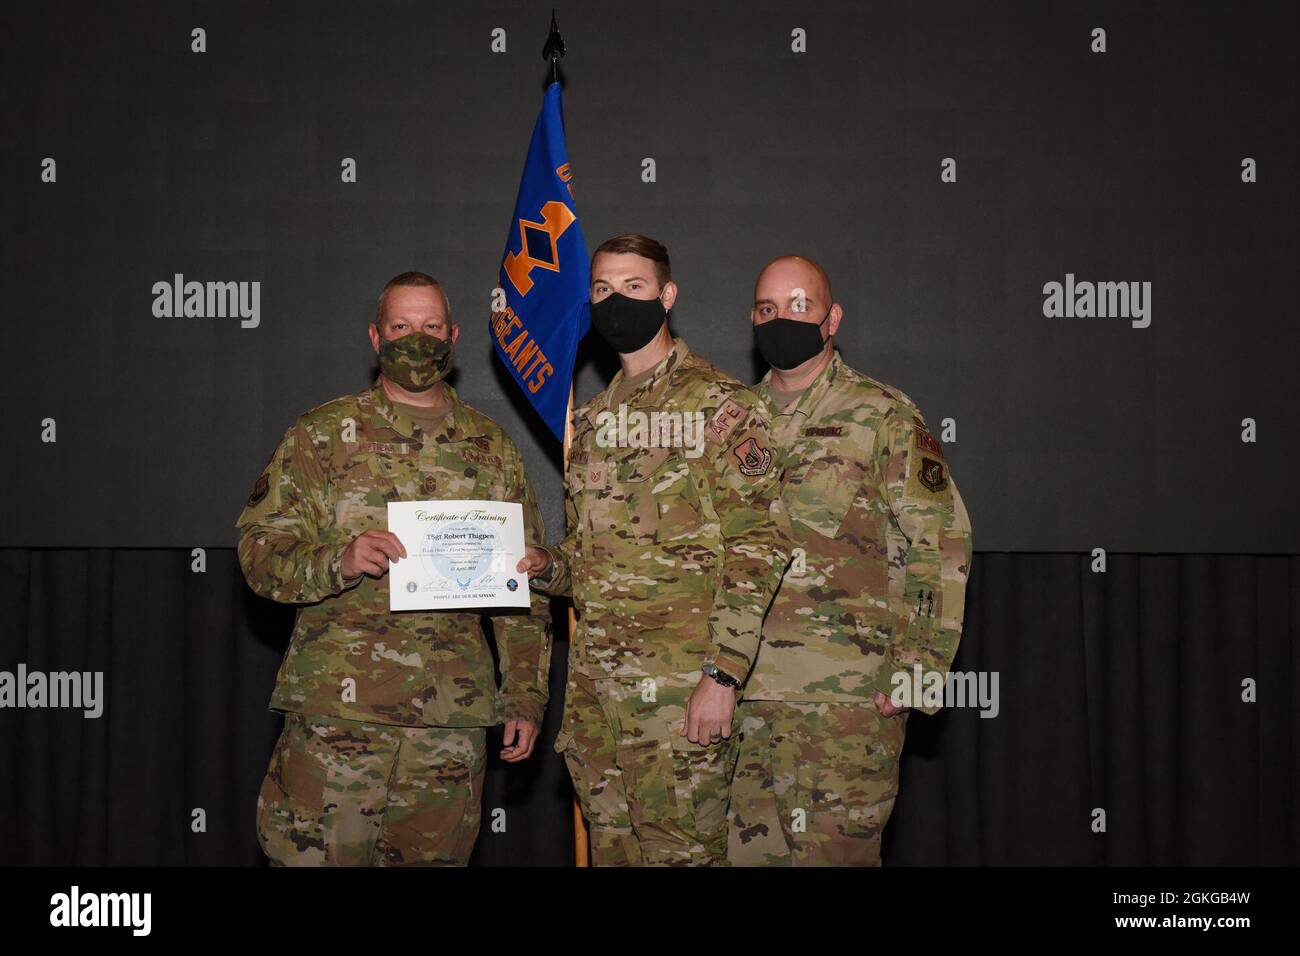 Tech. Sgt. Robert Thigpen, 51st Operations Support Squadron, accepts his certificate of training for successfully completing the First Sergeant Symposium course on Osan Air Base, Republic of Korea, April 15, 2021. Stock Photo